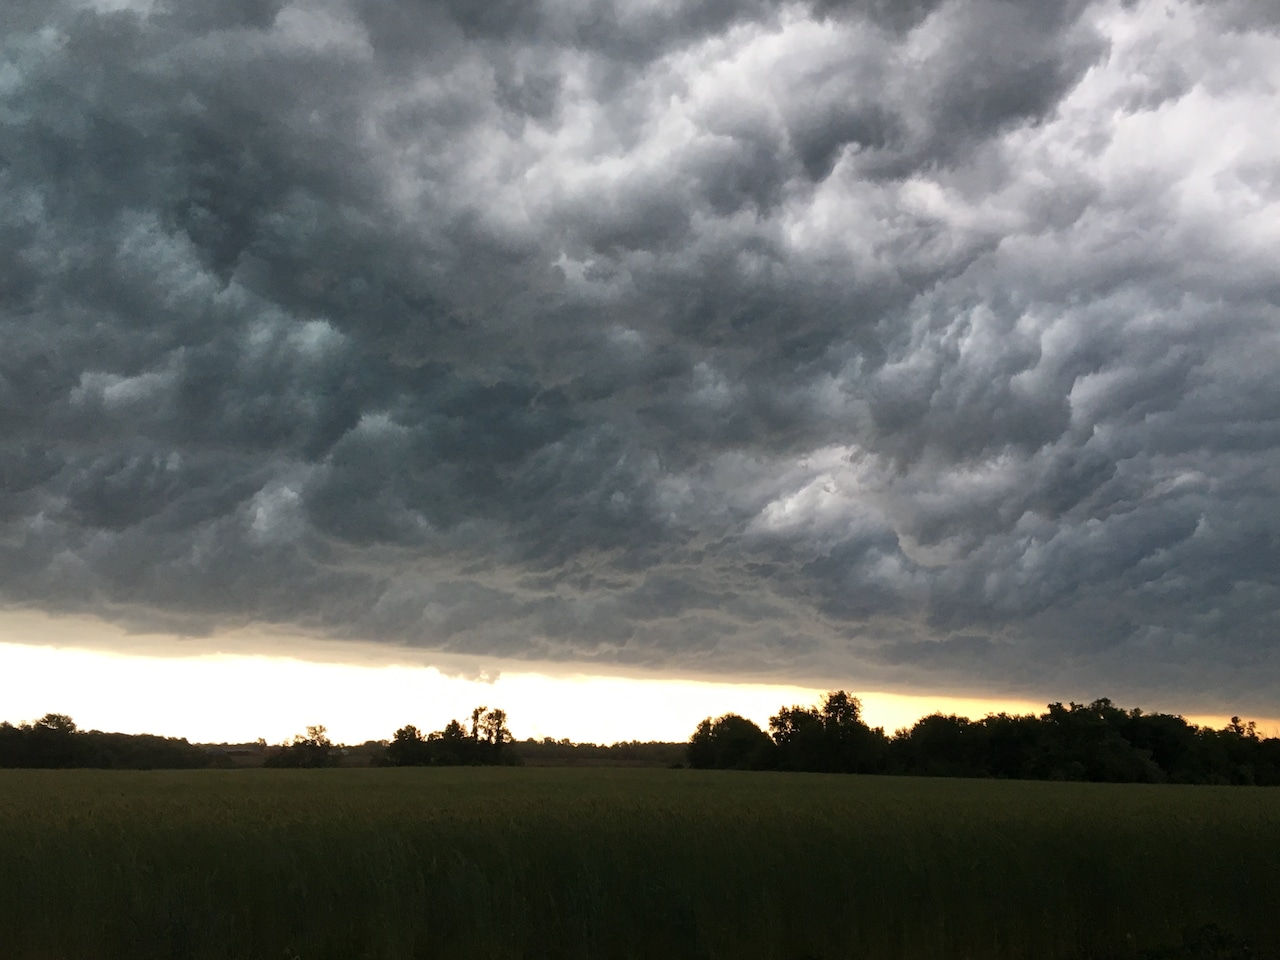 N.J. weather: Strong storms spark severe thunderstorm warnings in parts of state [Video]